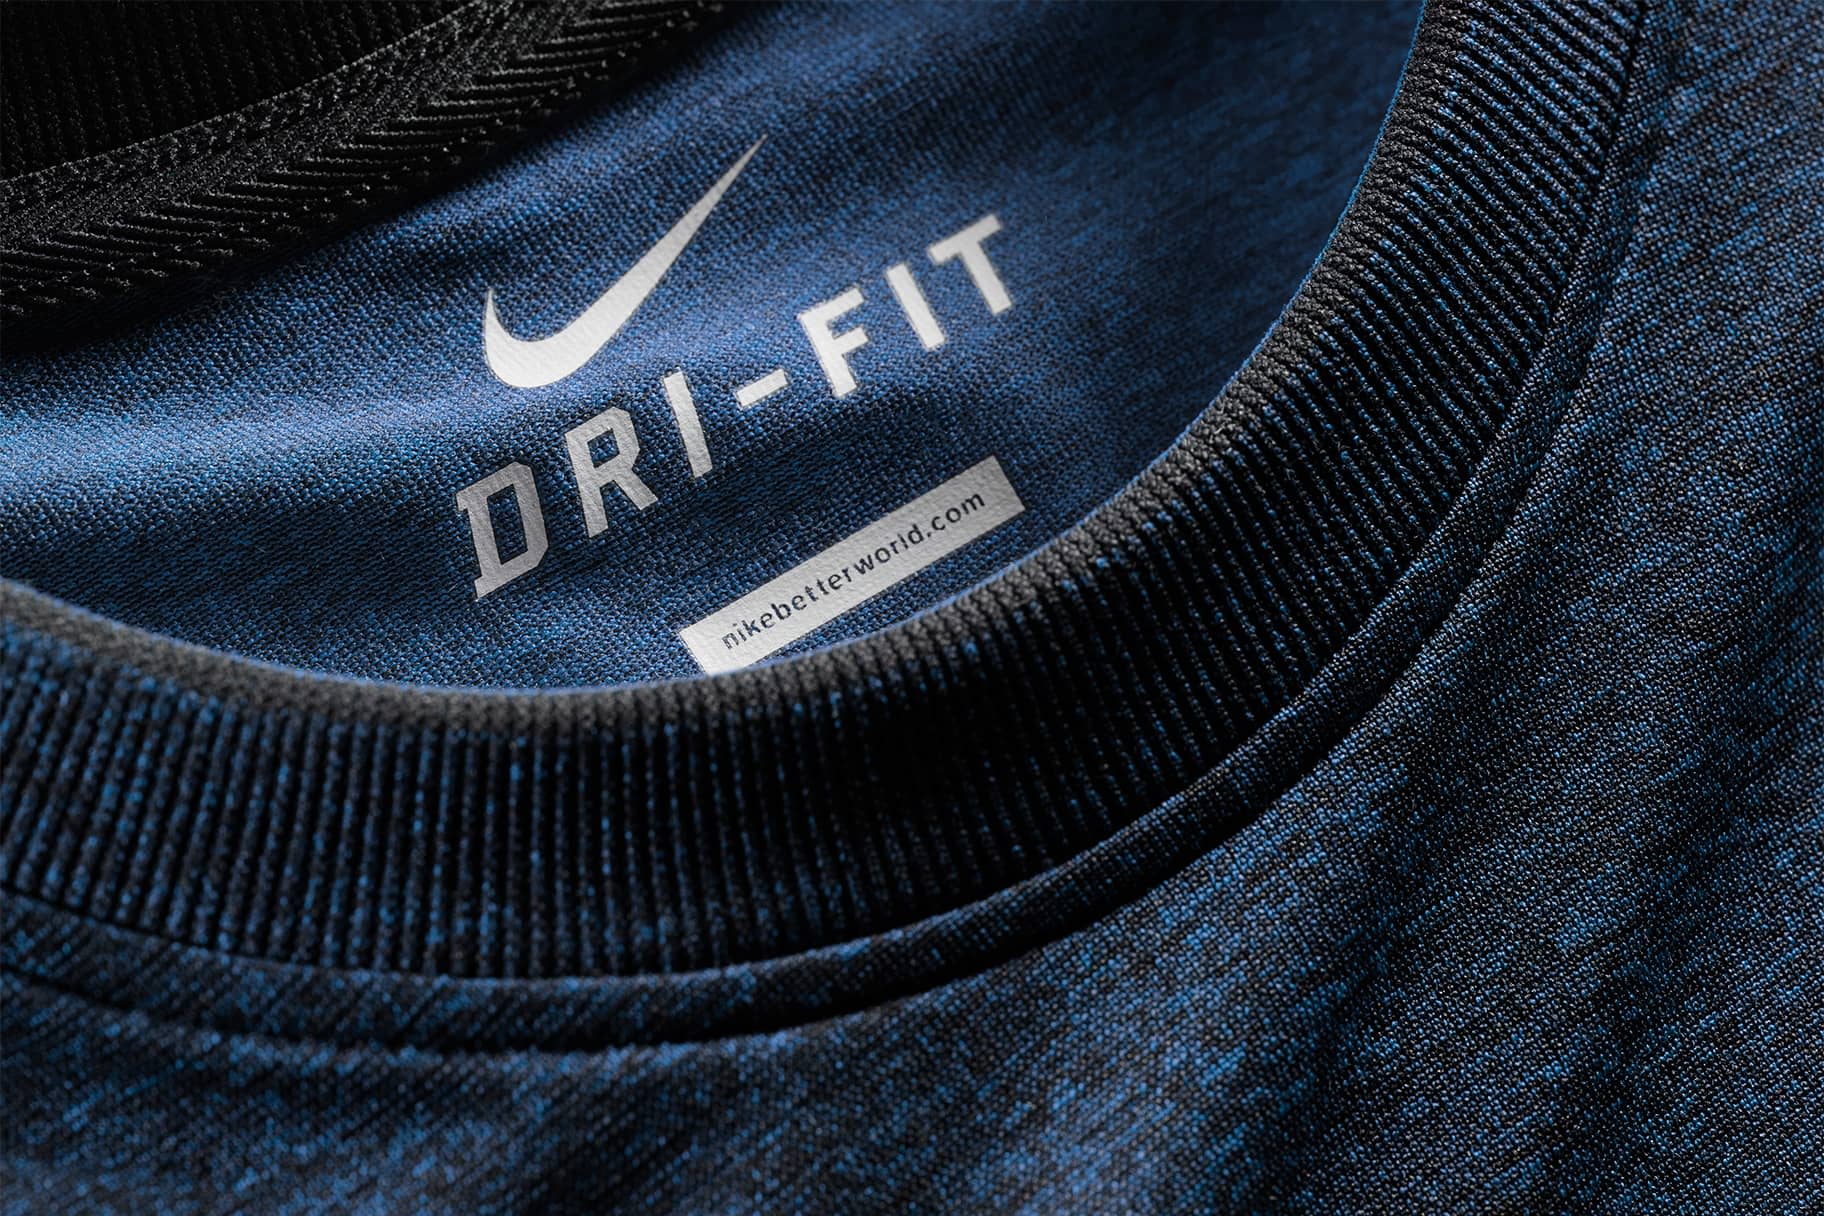 The Best Workout Shirts by Nike